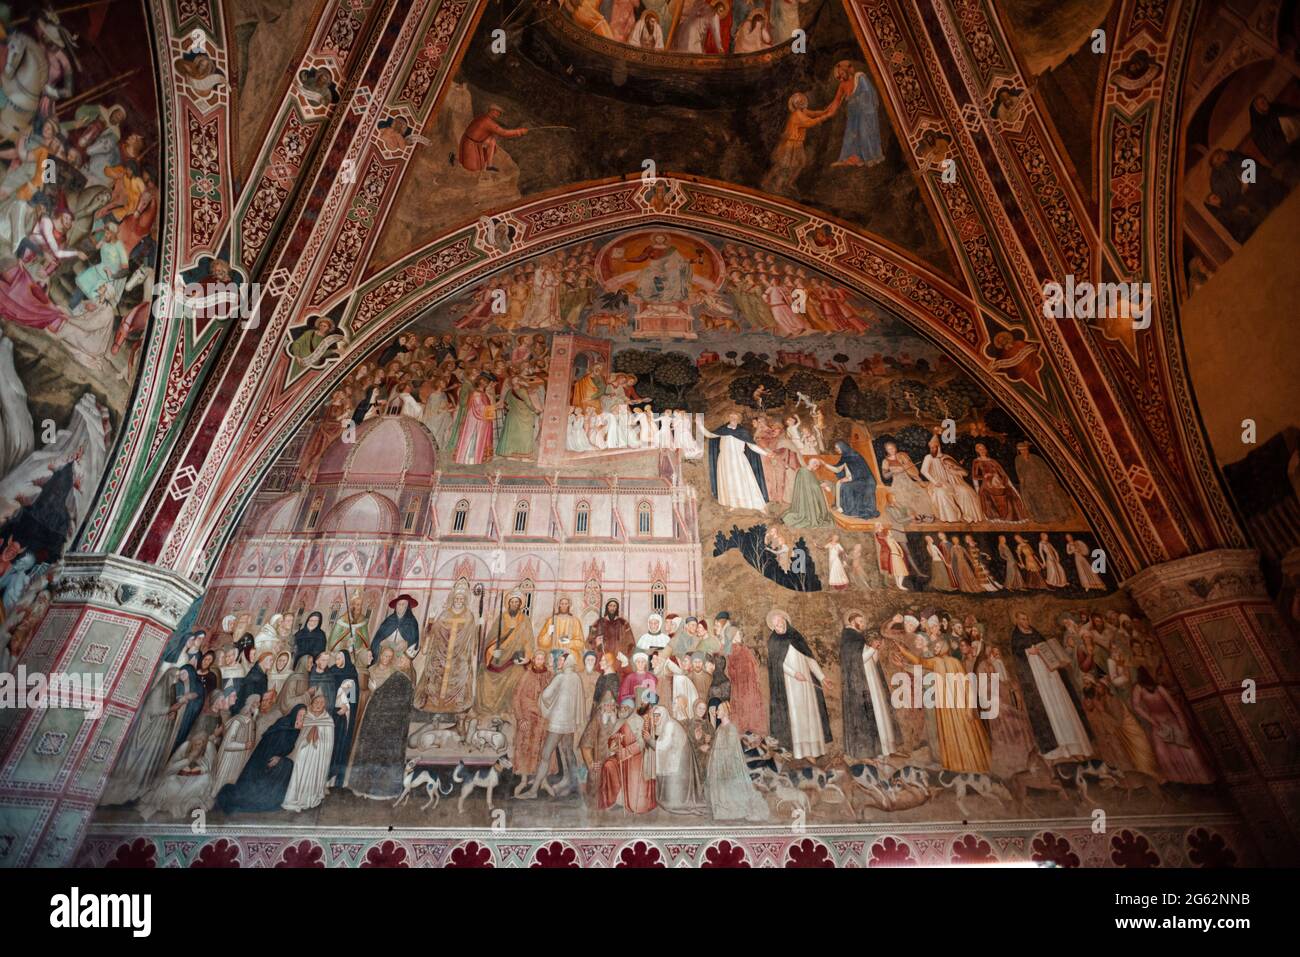 Religious Ceiling paintings, cloister of the Basilici di Santa Novella, Florence, Italy. Stock Photo